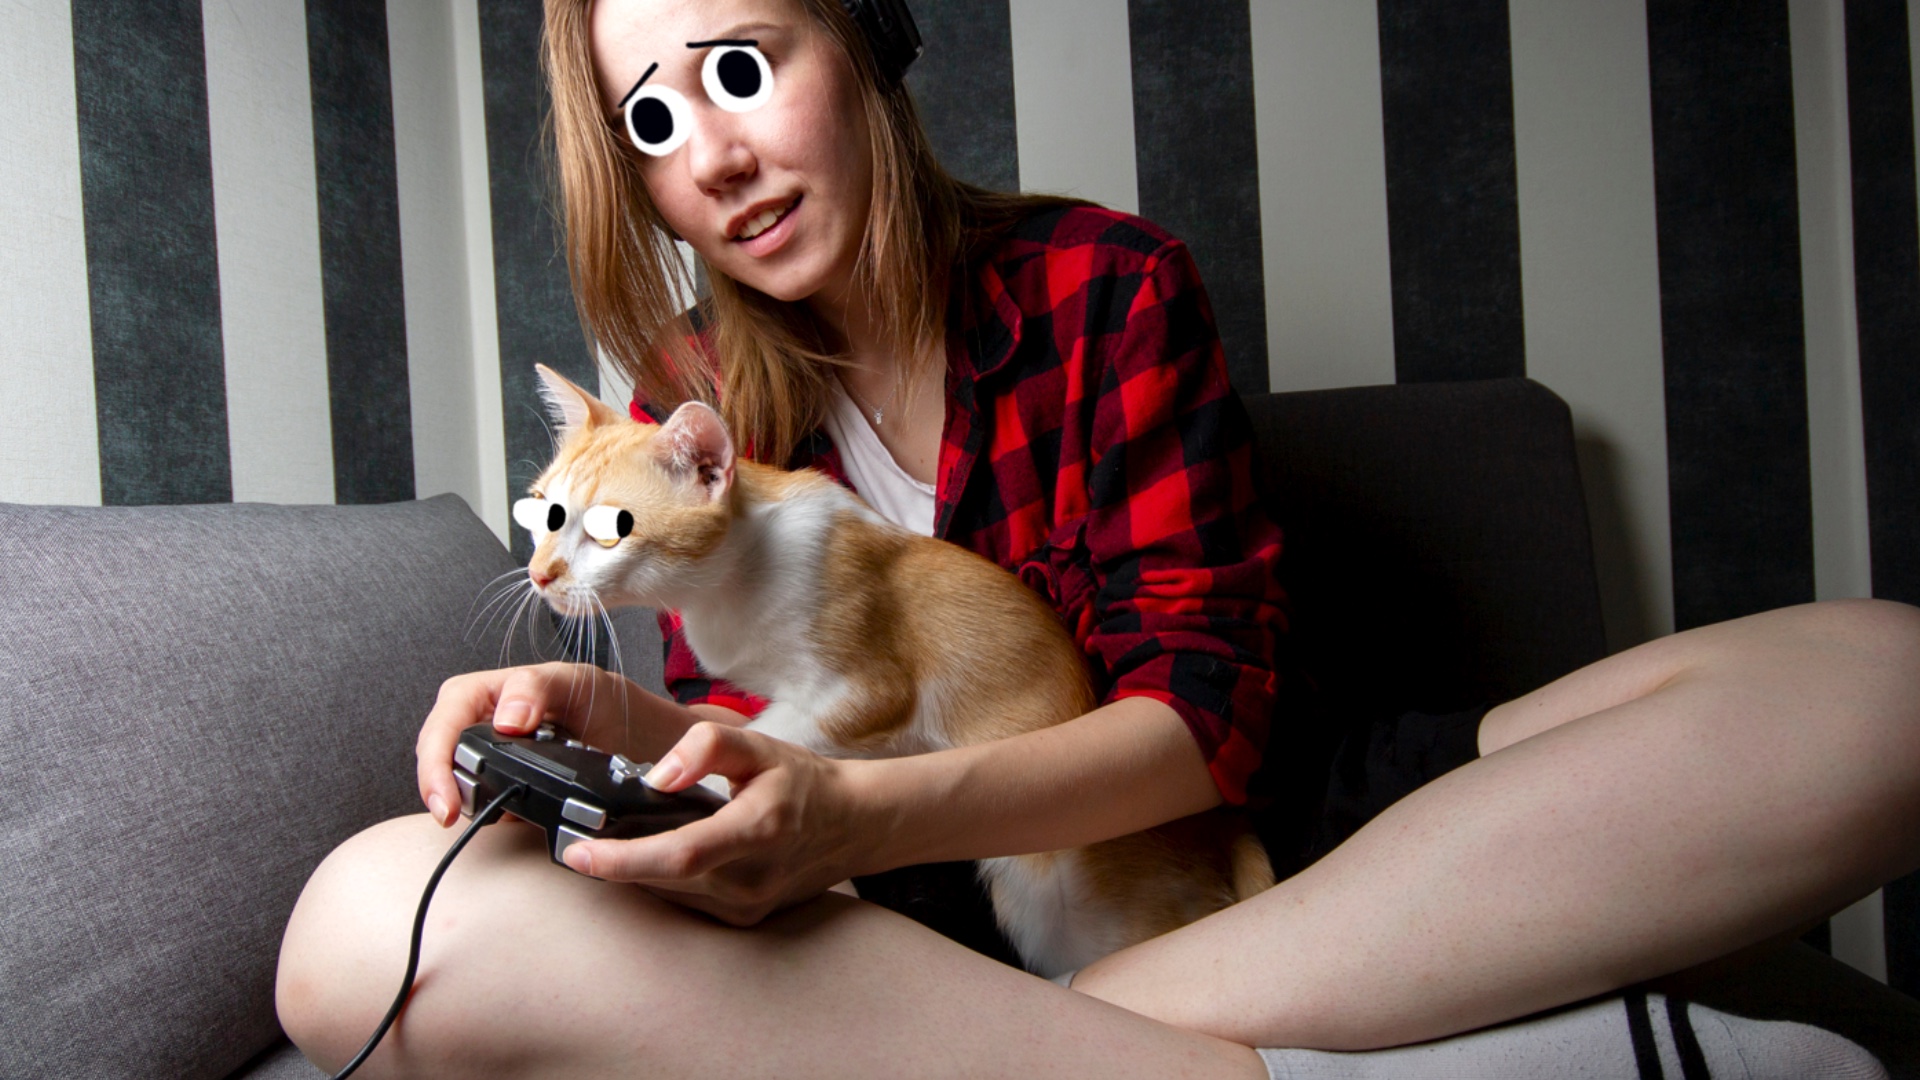 A gamer and her pet